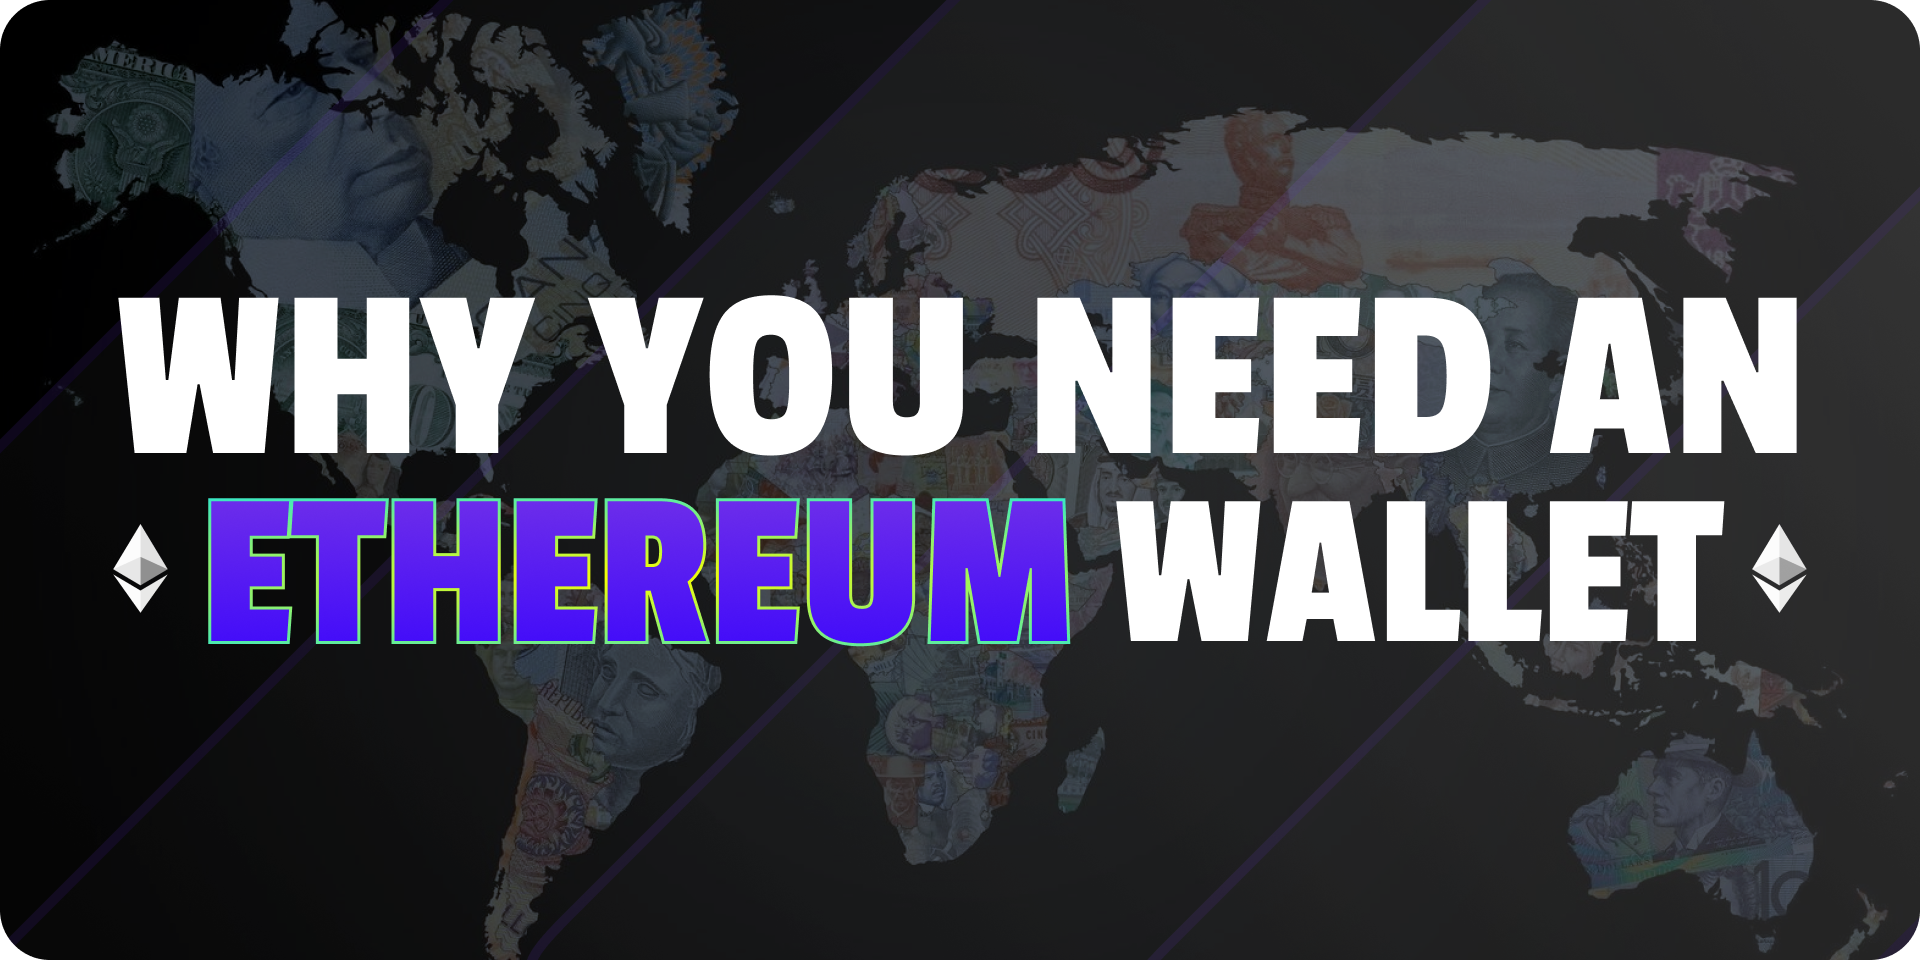 Why do I need an Ethereum wallet?